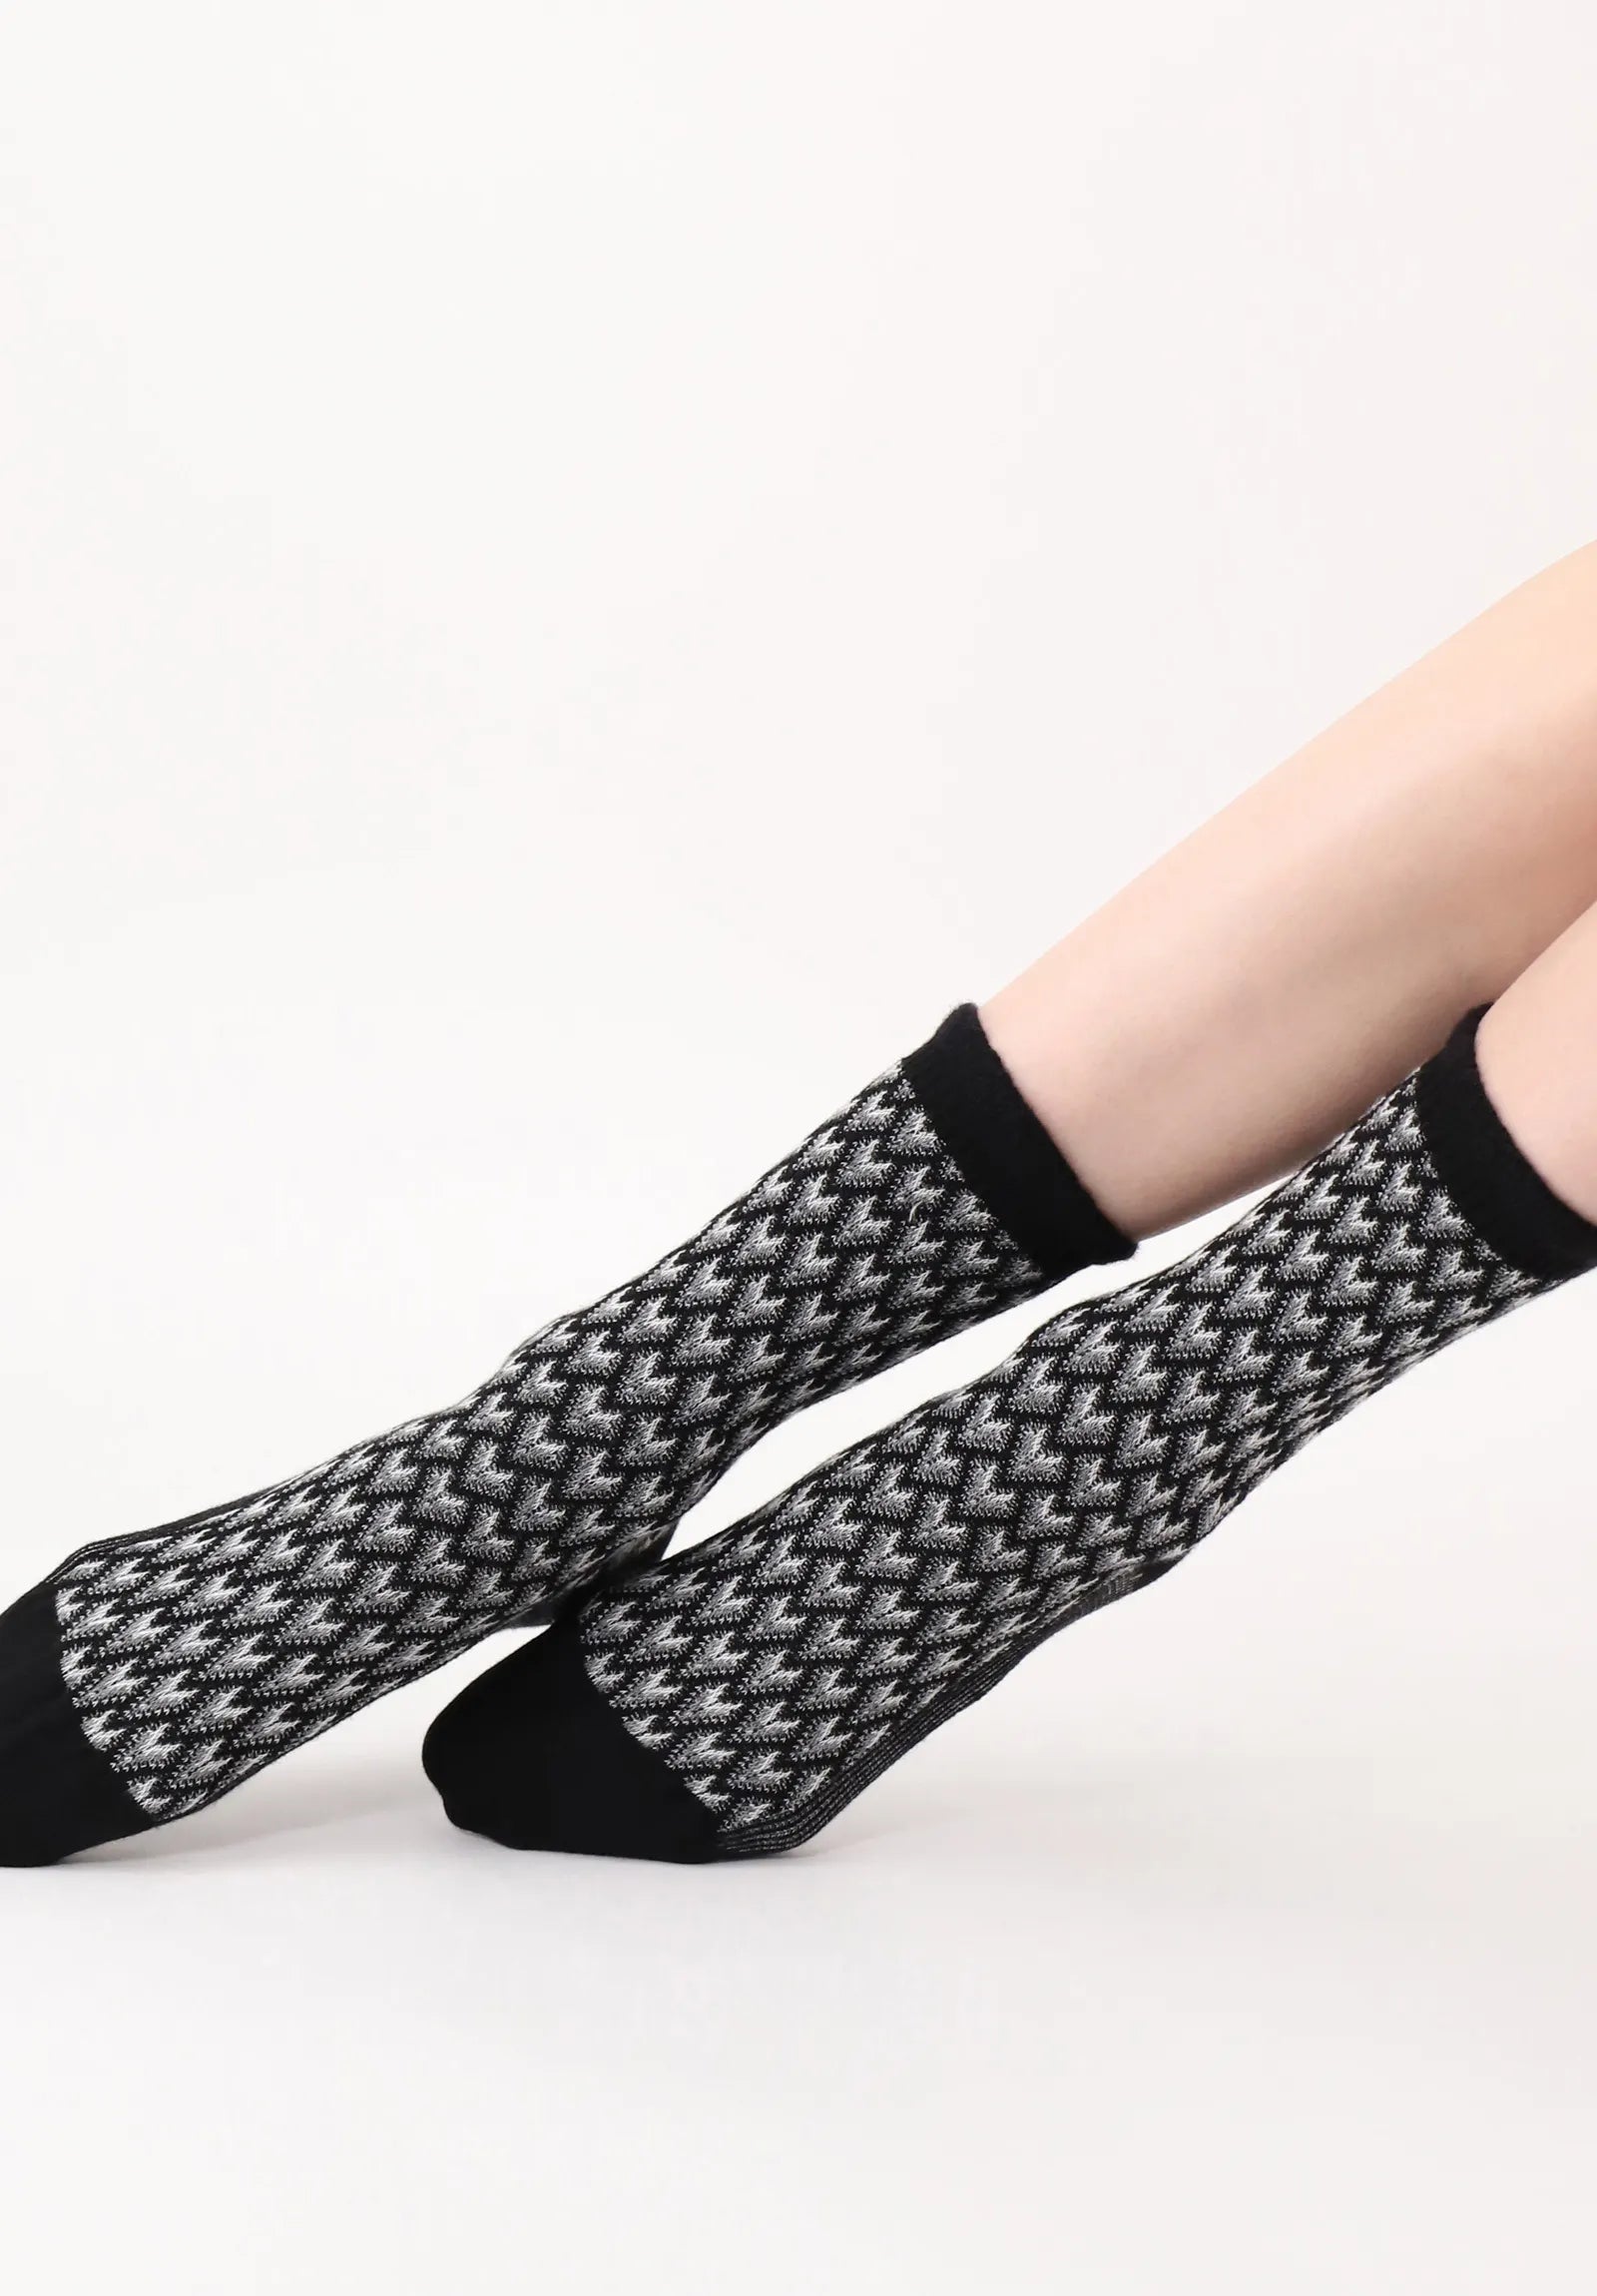 Oroblù Jacquard Deco Sock - Black cotton mix fashion knitted ankle socks with a three tone jacquard pattern in shades of grey and slight ruffled cuff.